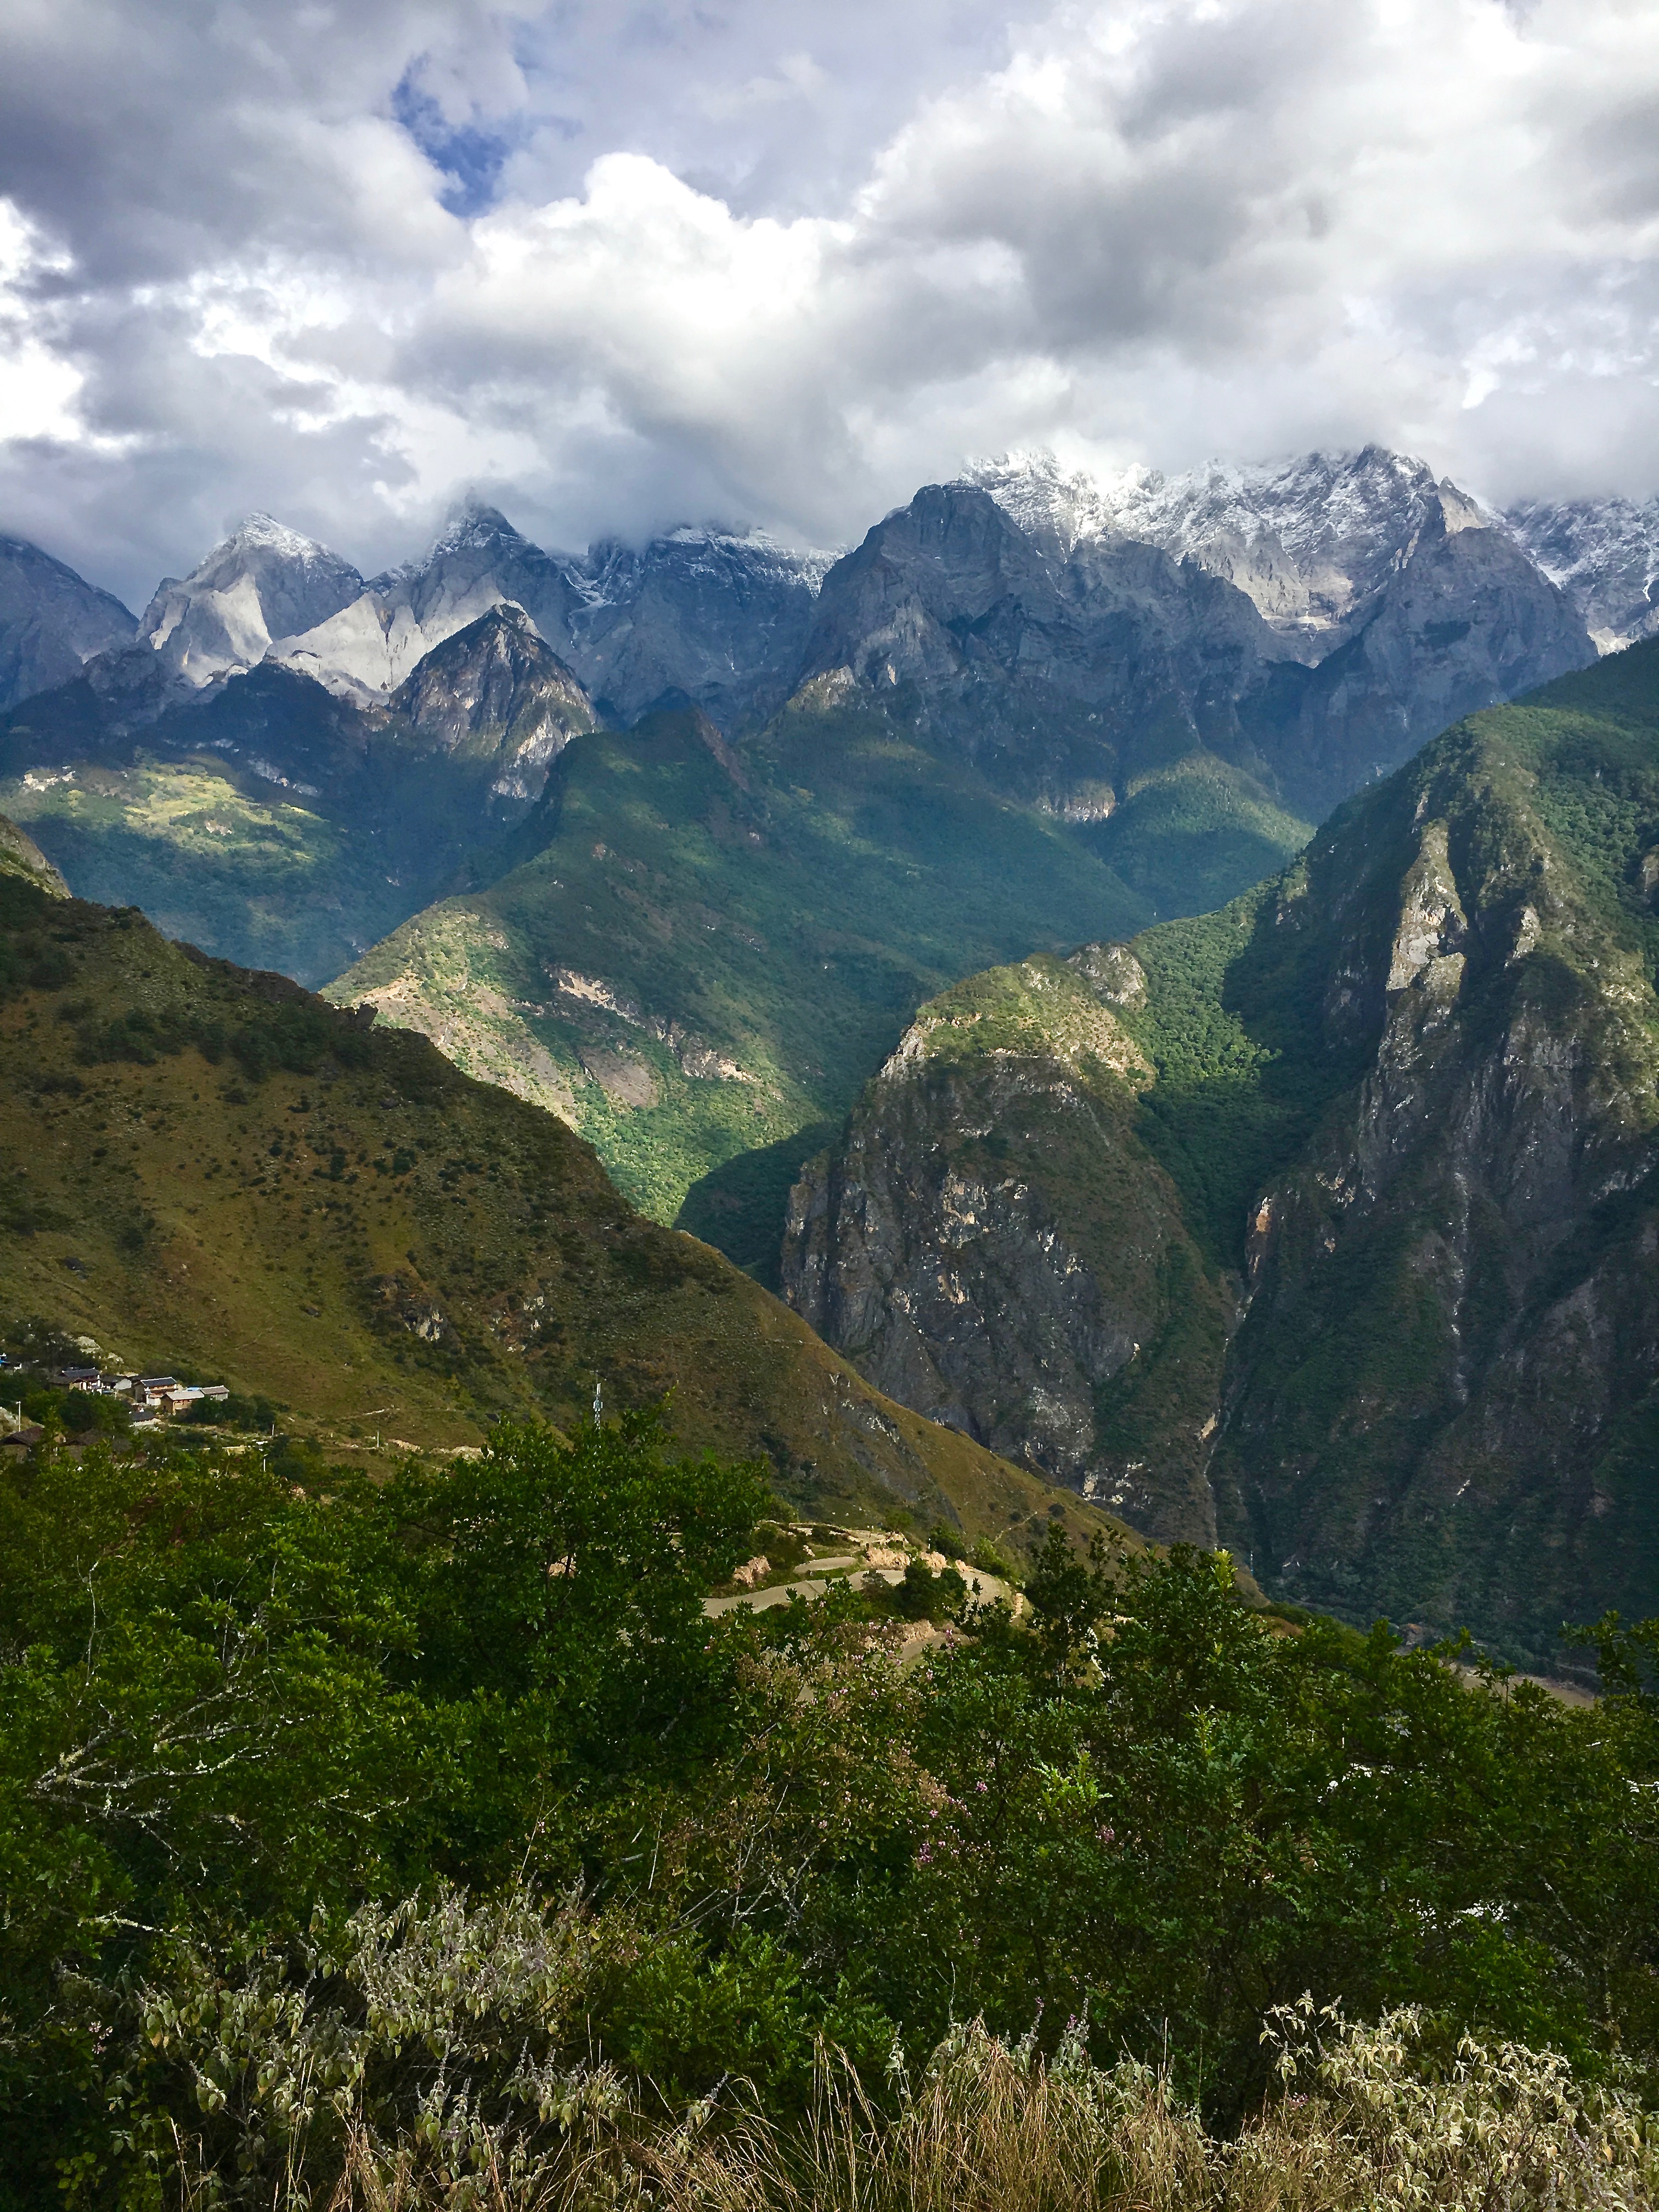 Tiger Leaping Gorge 1